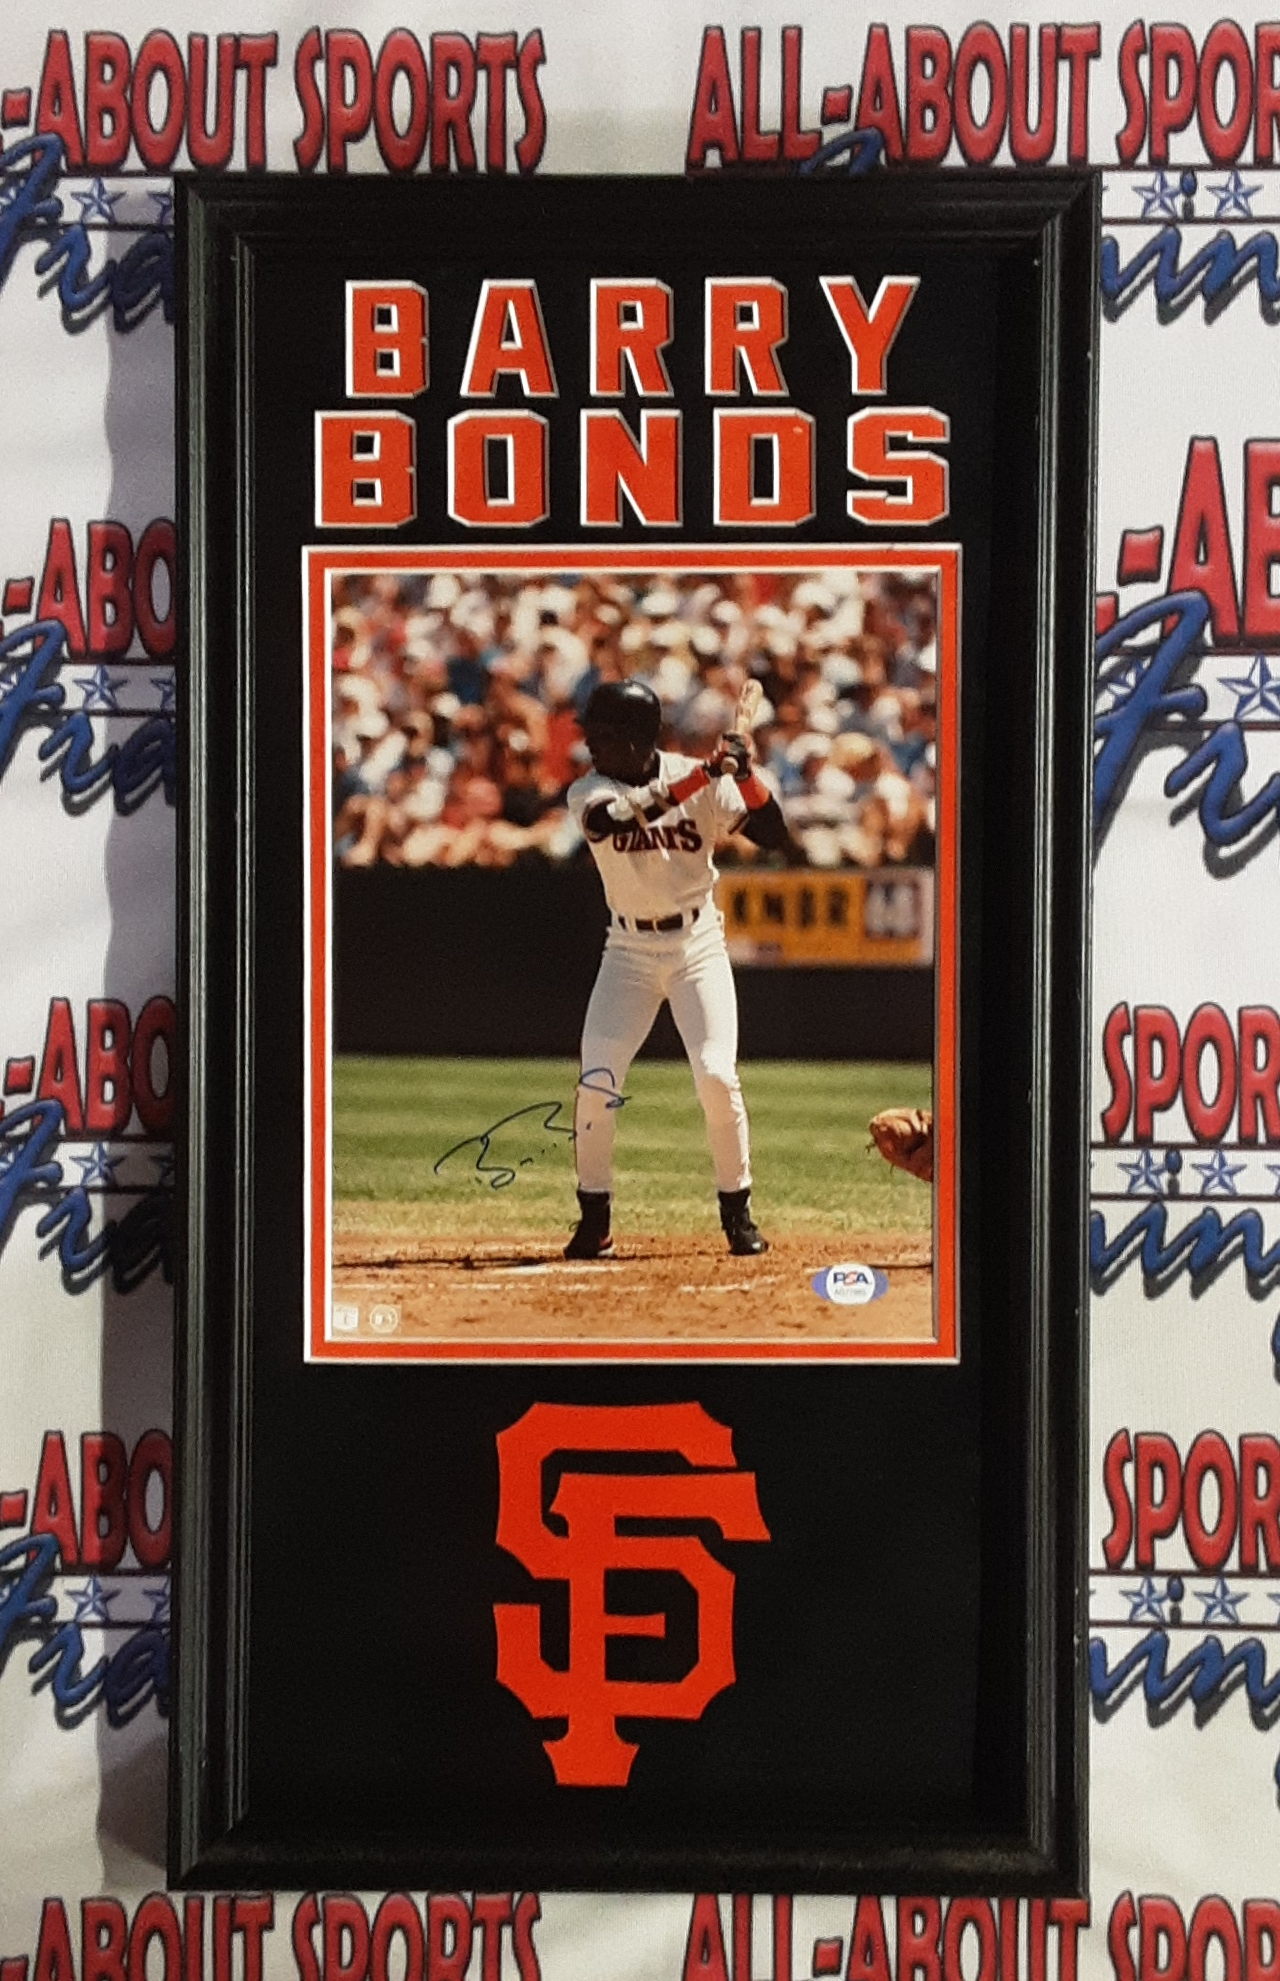 Barry Bonds Authentic Signed 8x10 photo Framed Collage Autographed PSA